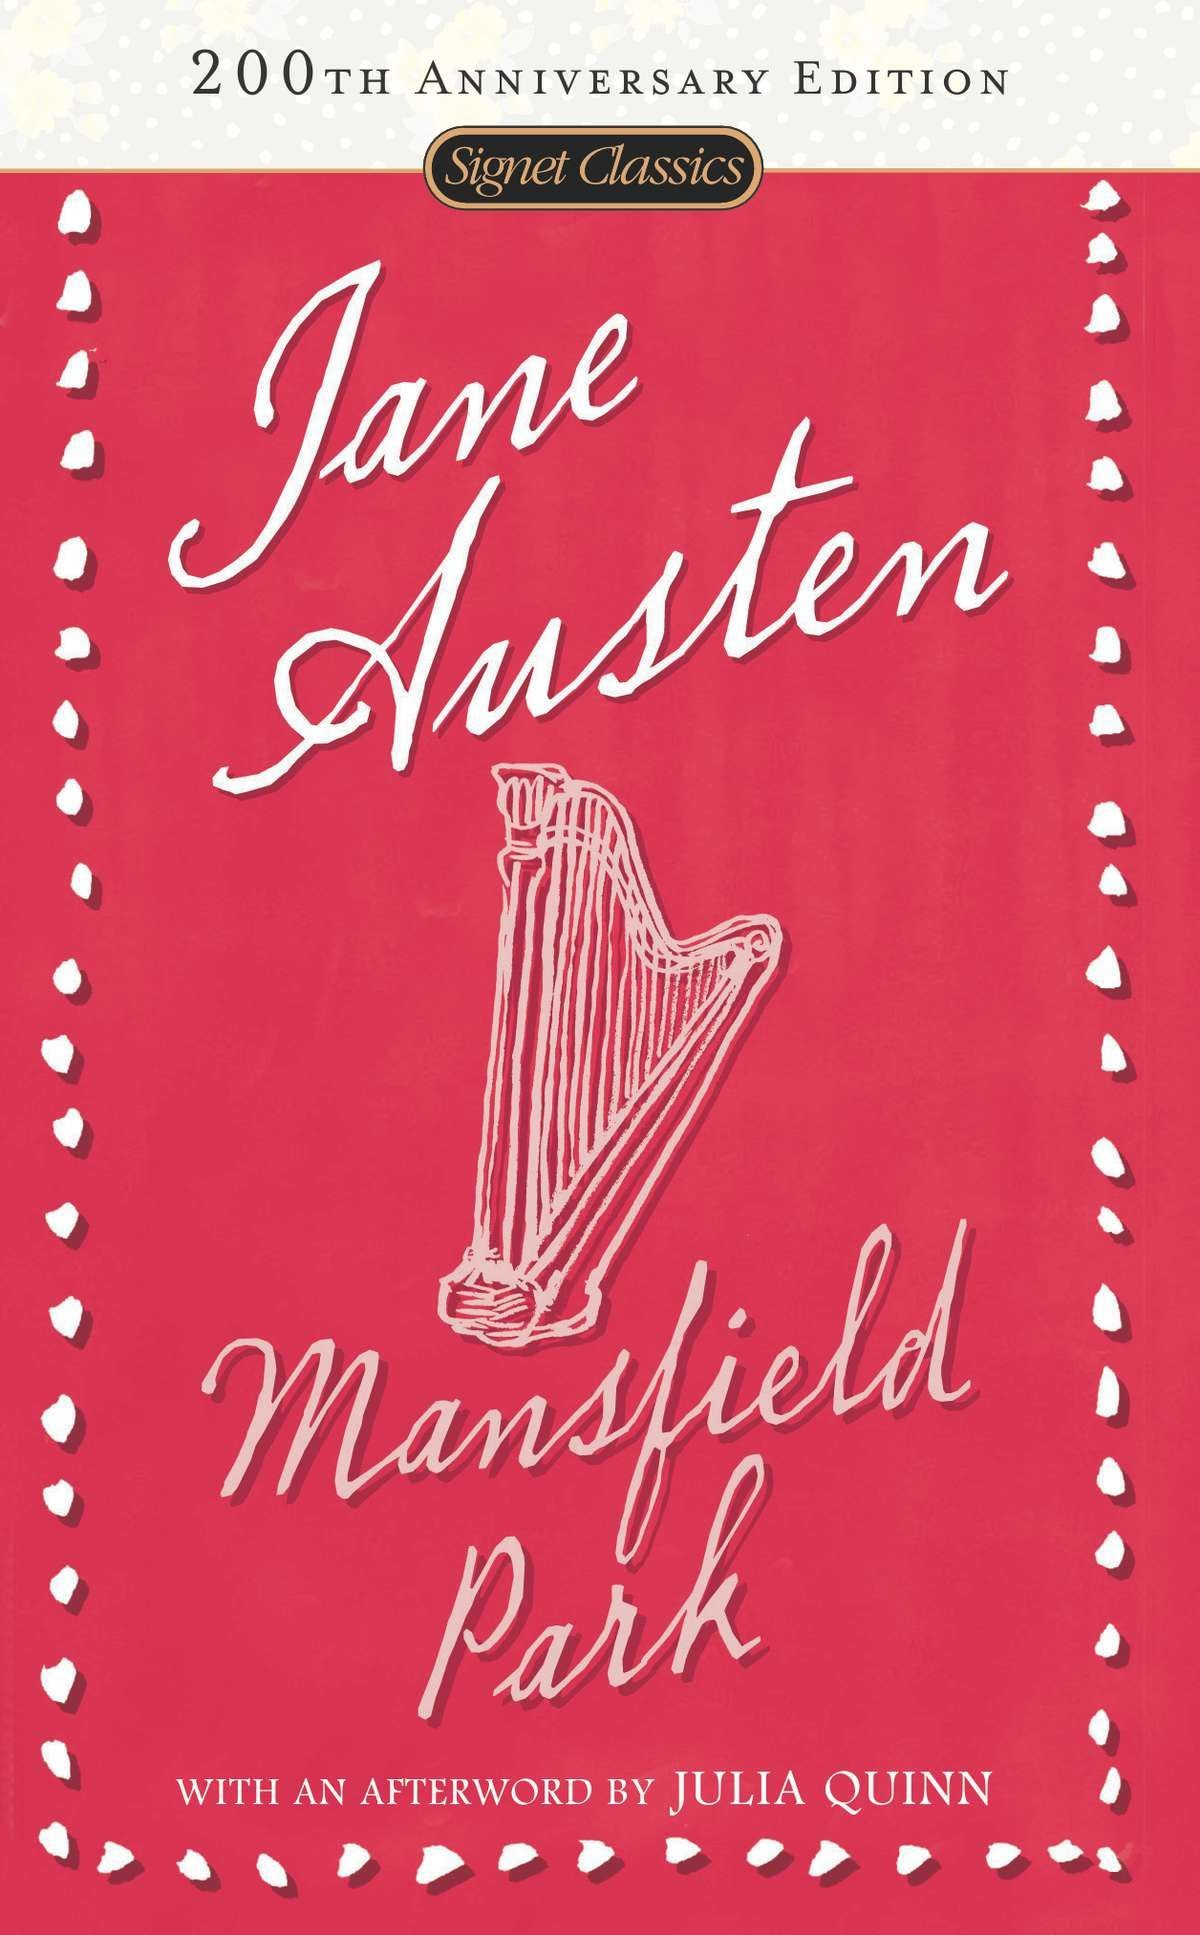 The cover art for Signet Classics 200th anniversary edition of Mansfield Park, by Jane Austen, "with an afterword by Julia Quinn."